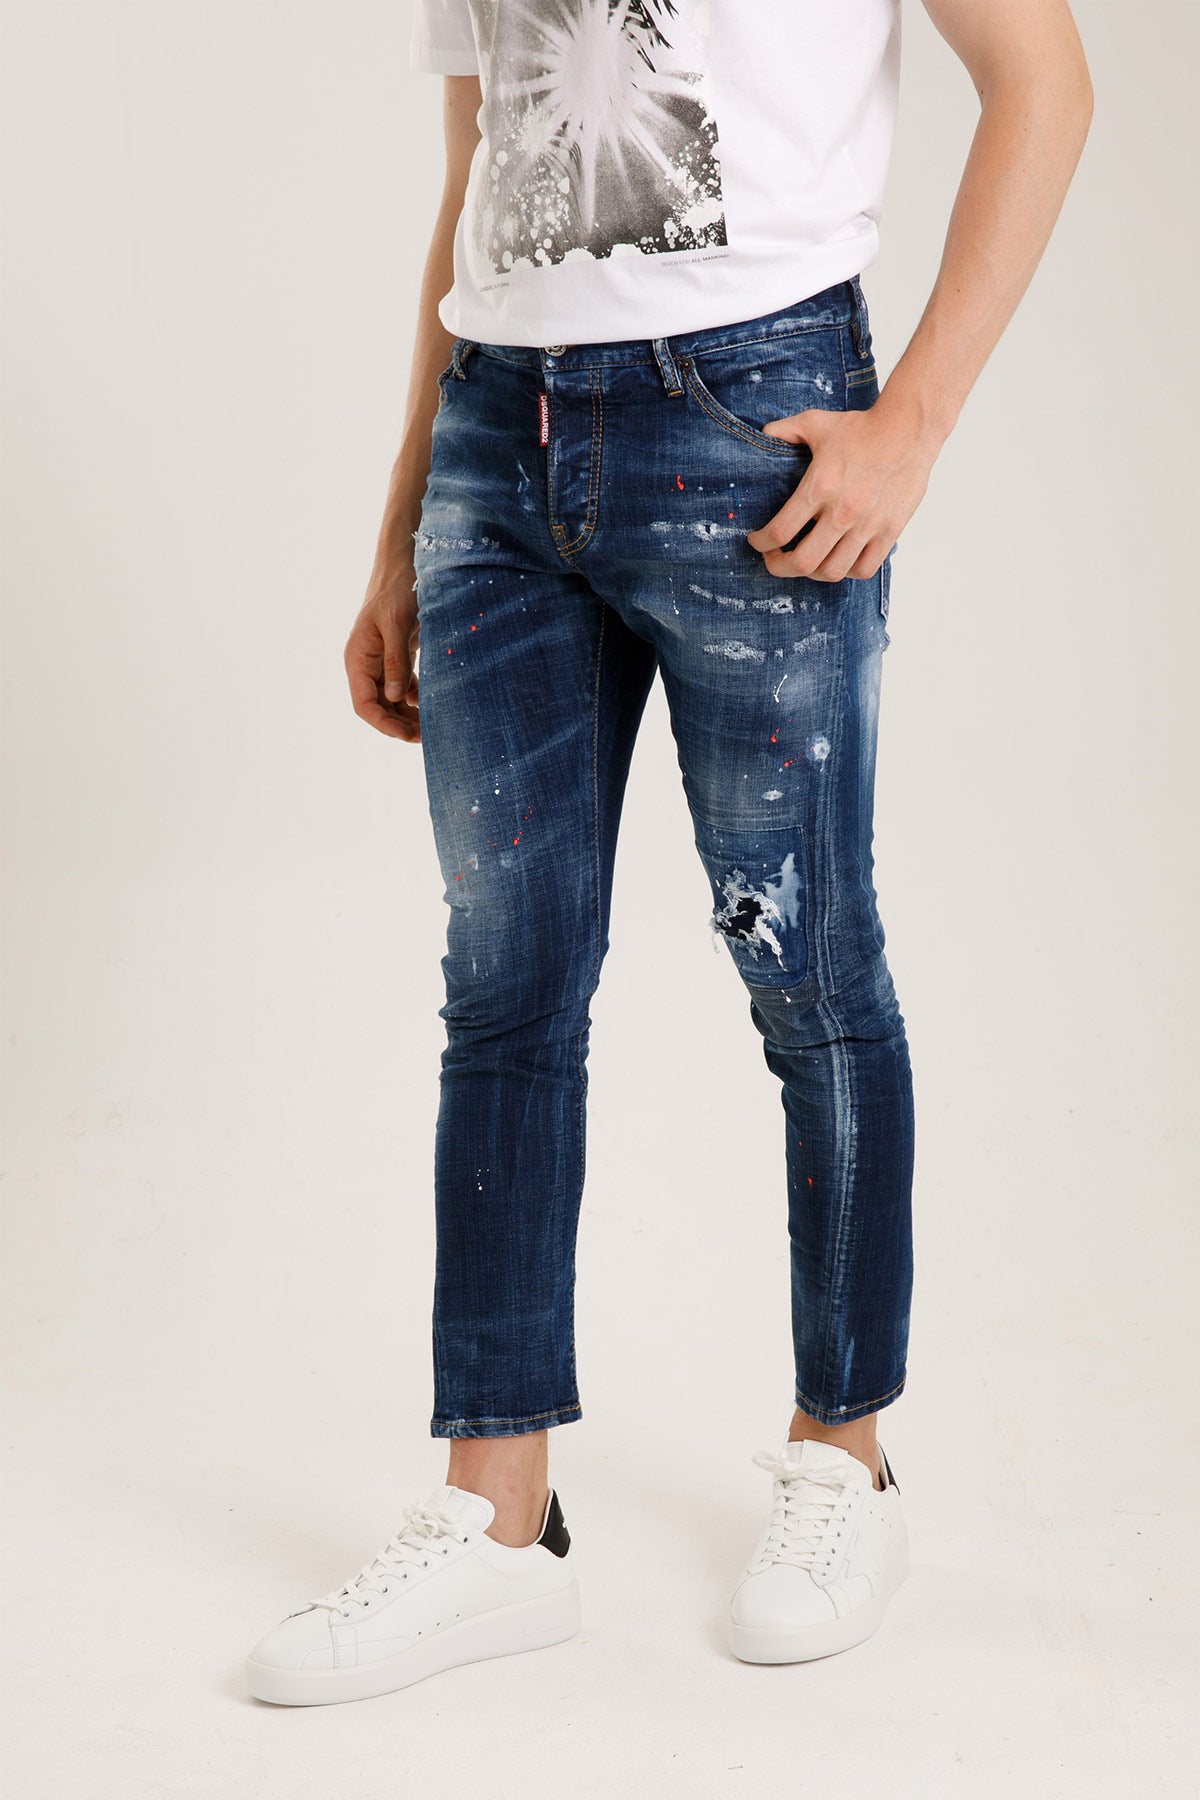 Dsquared Sexy Twist Jeans-Libas Trendy Fashion Store